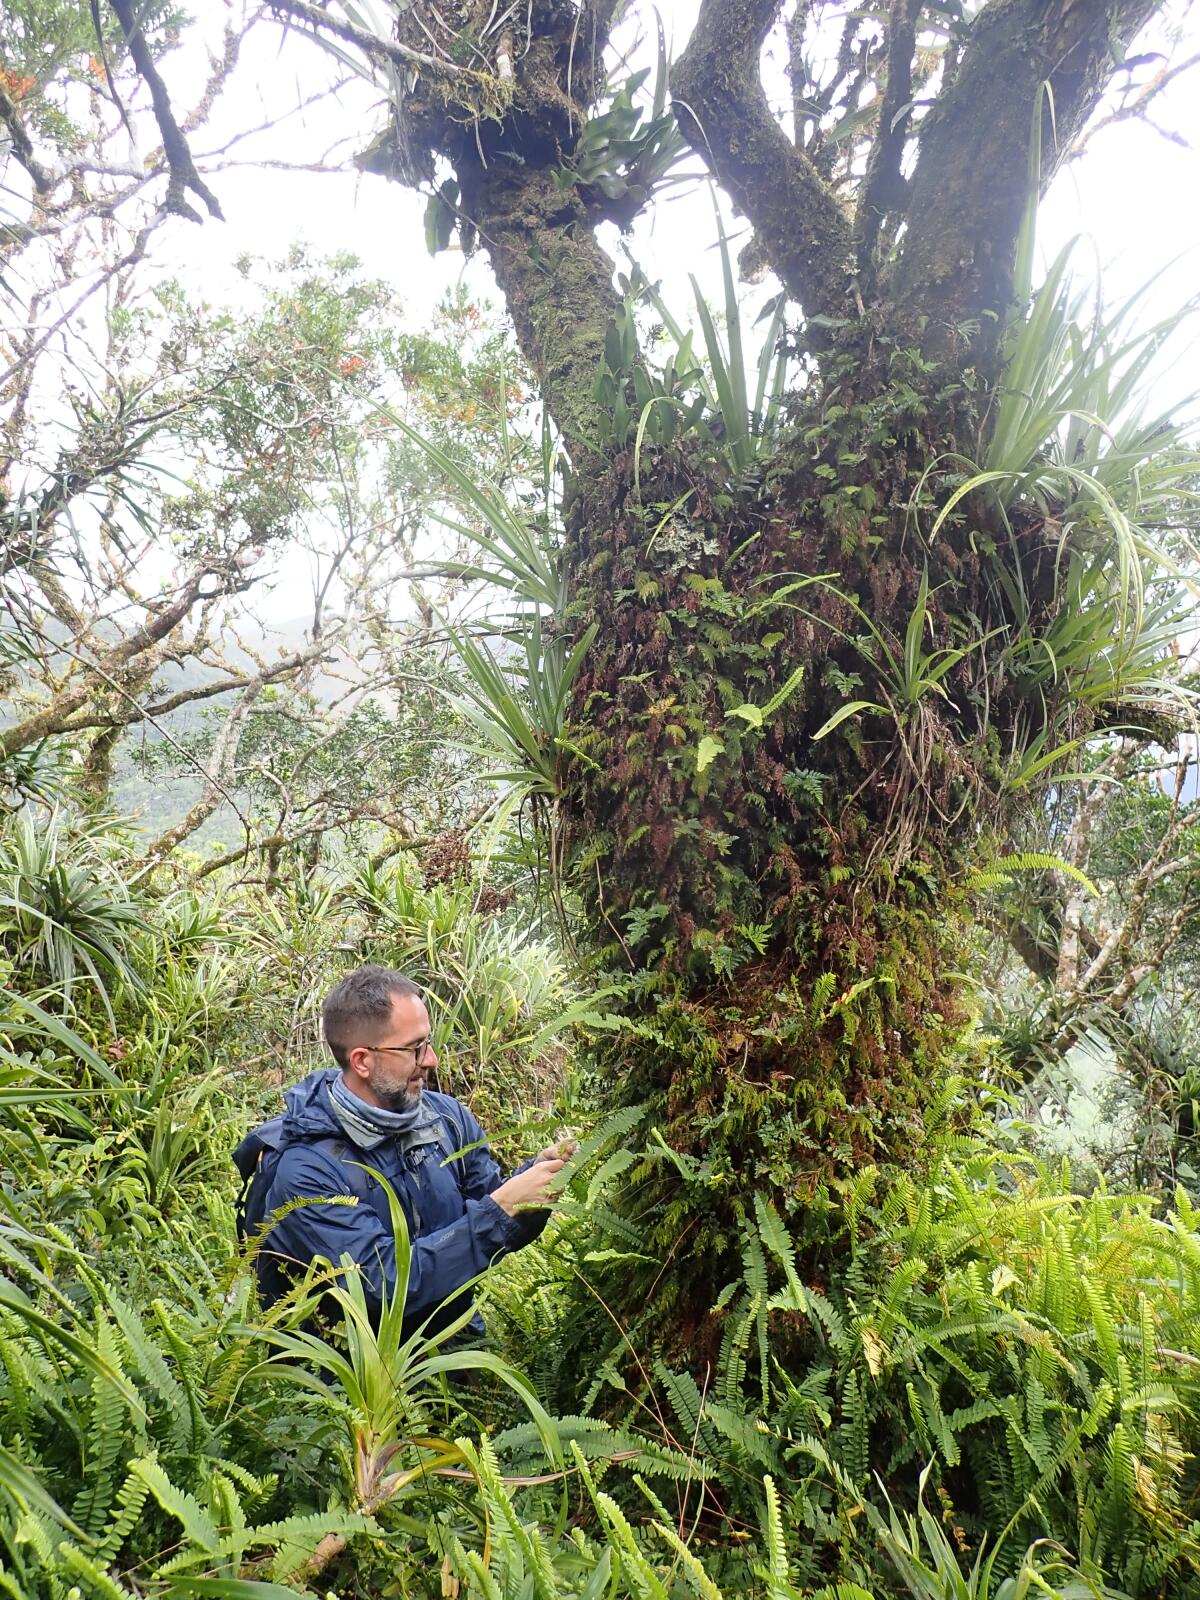 A man in a jacket next to a tree, surrounded by ferns and other foliage